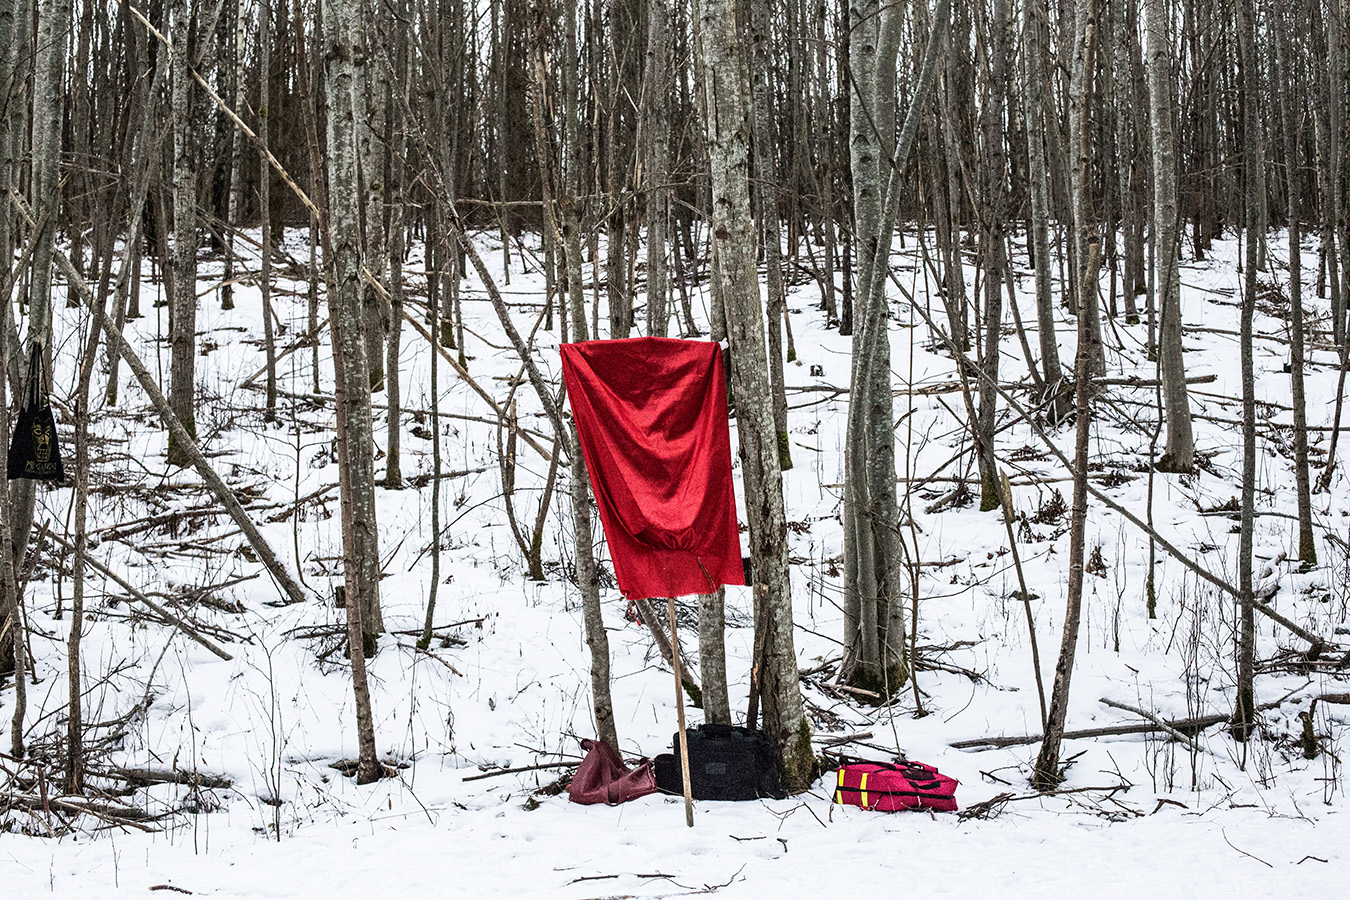  A mock battle banner rests in a forest during a training session for Viking reenactors in Norway. February 2018.  